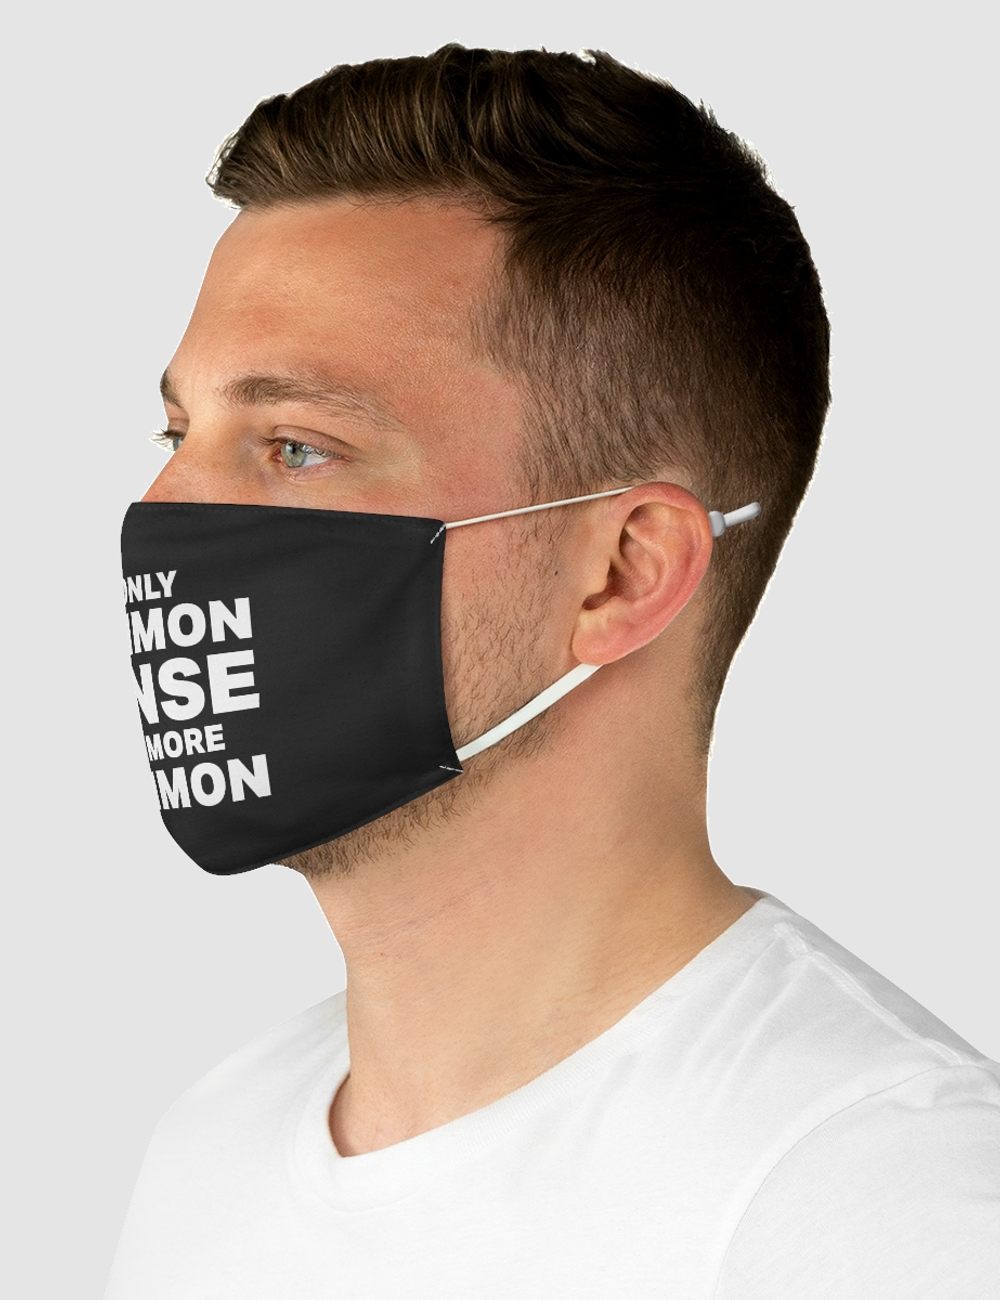 If Only Common Sense Was More Common Fabric Face Mask OniTakai